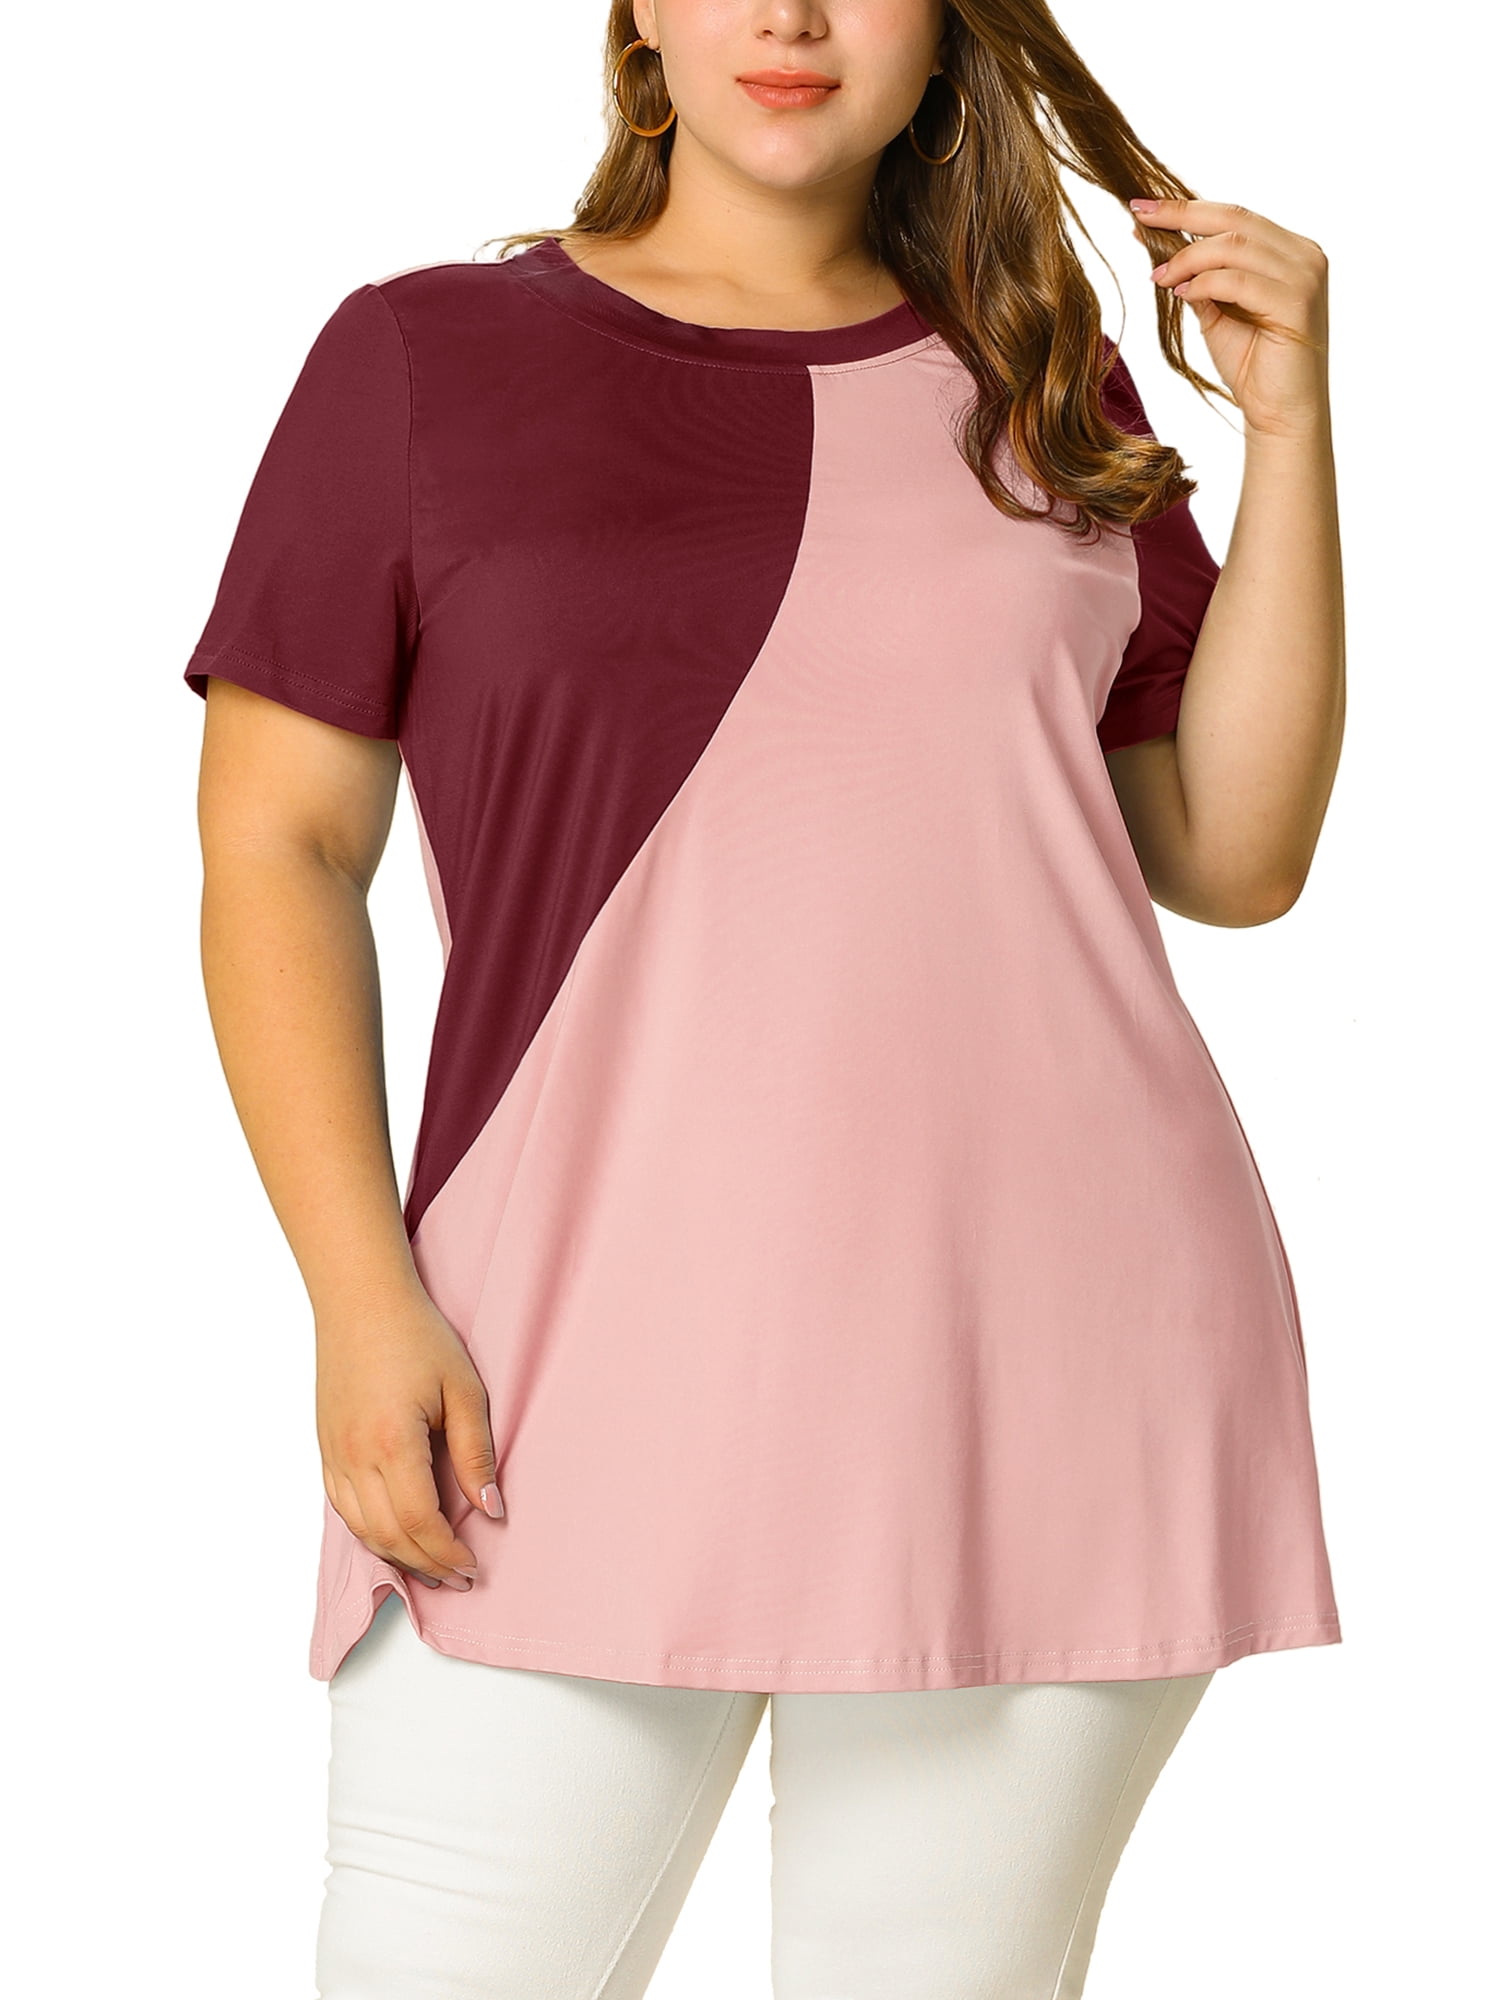 Women Pullover Short Sleeve Tunics Shirt Solid Color Ruched Irregular T-Shirt Tops Scoop Neck Sweetheart Top